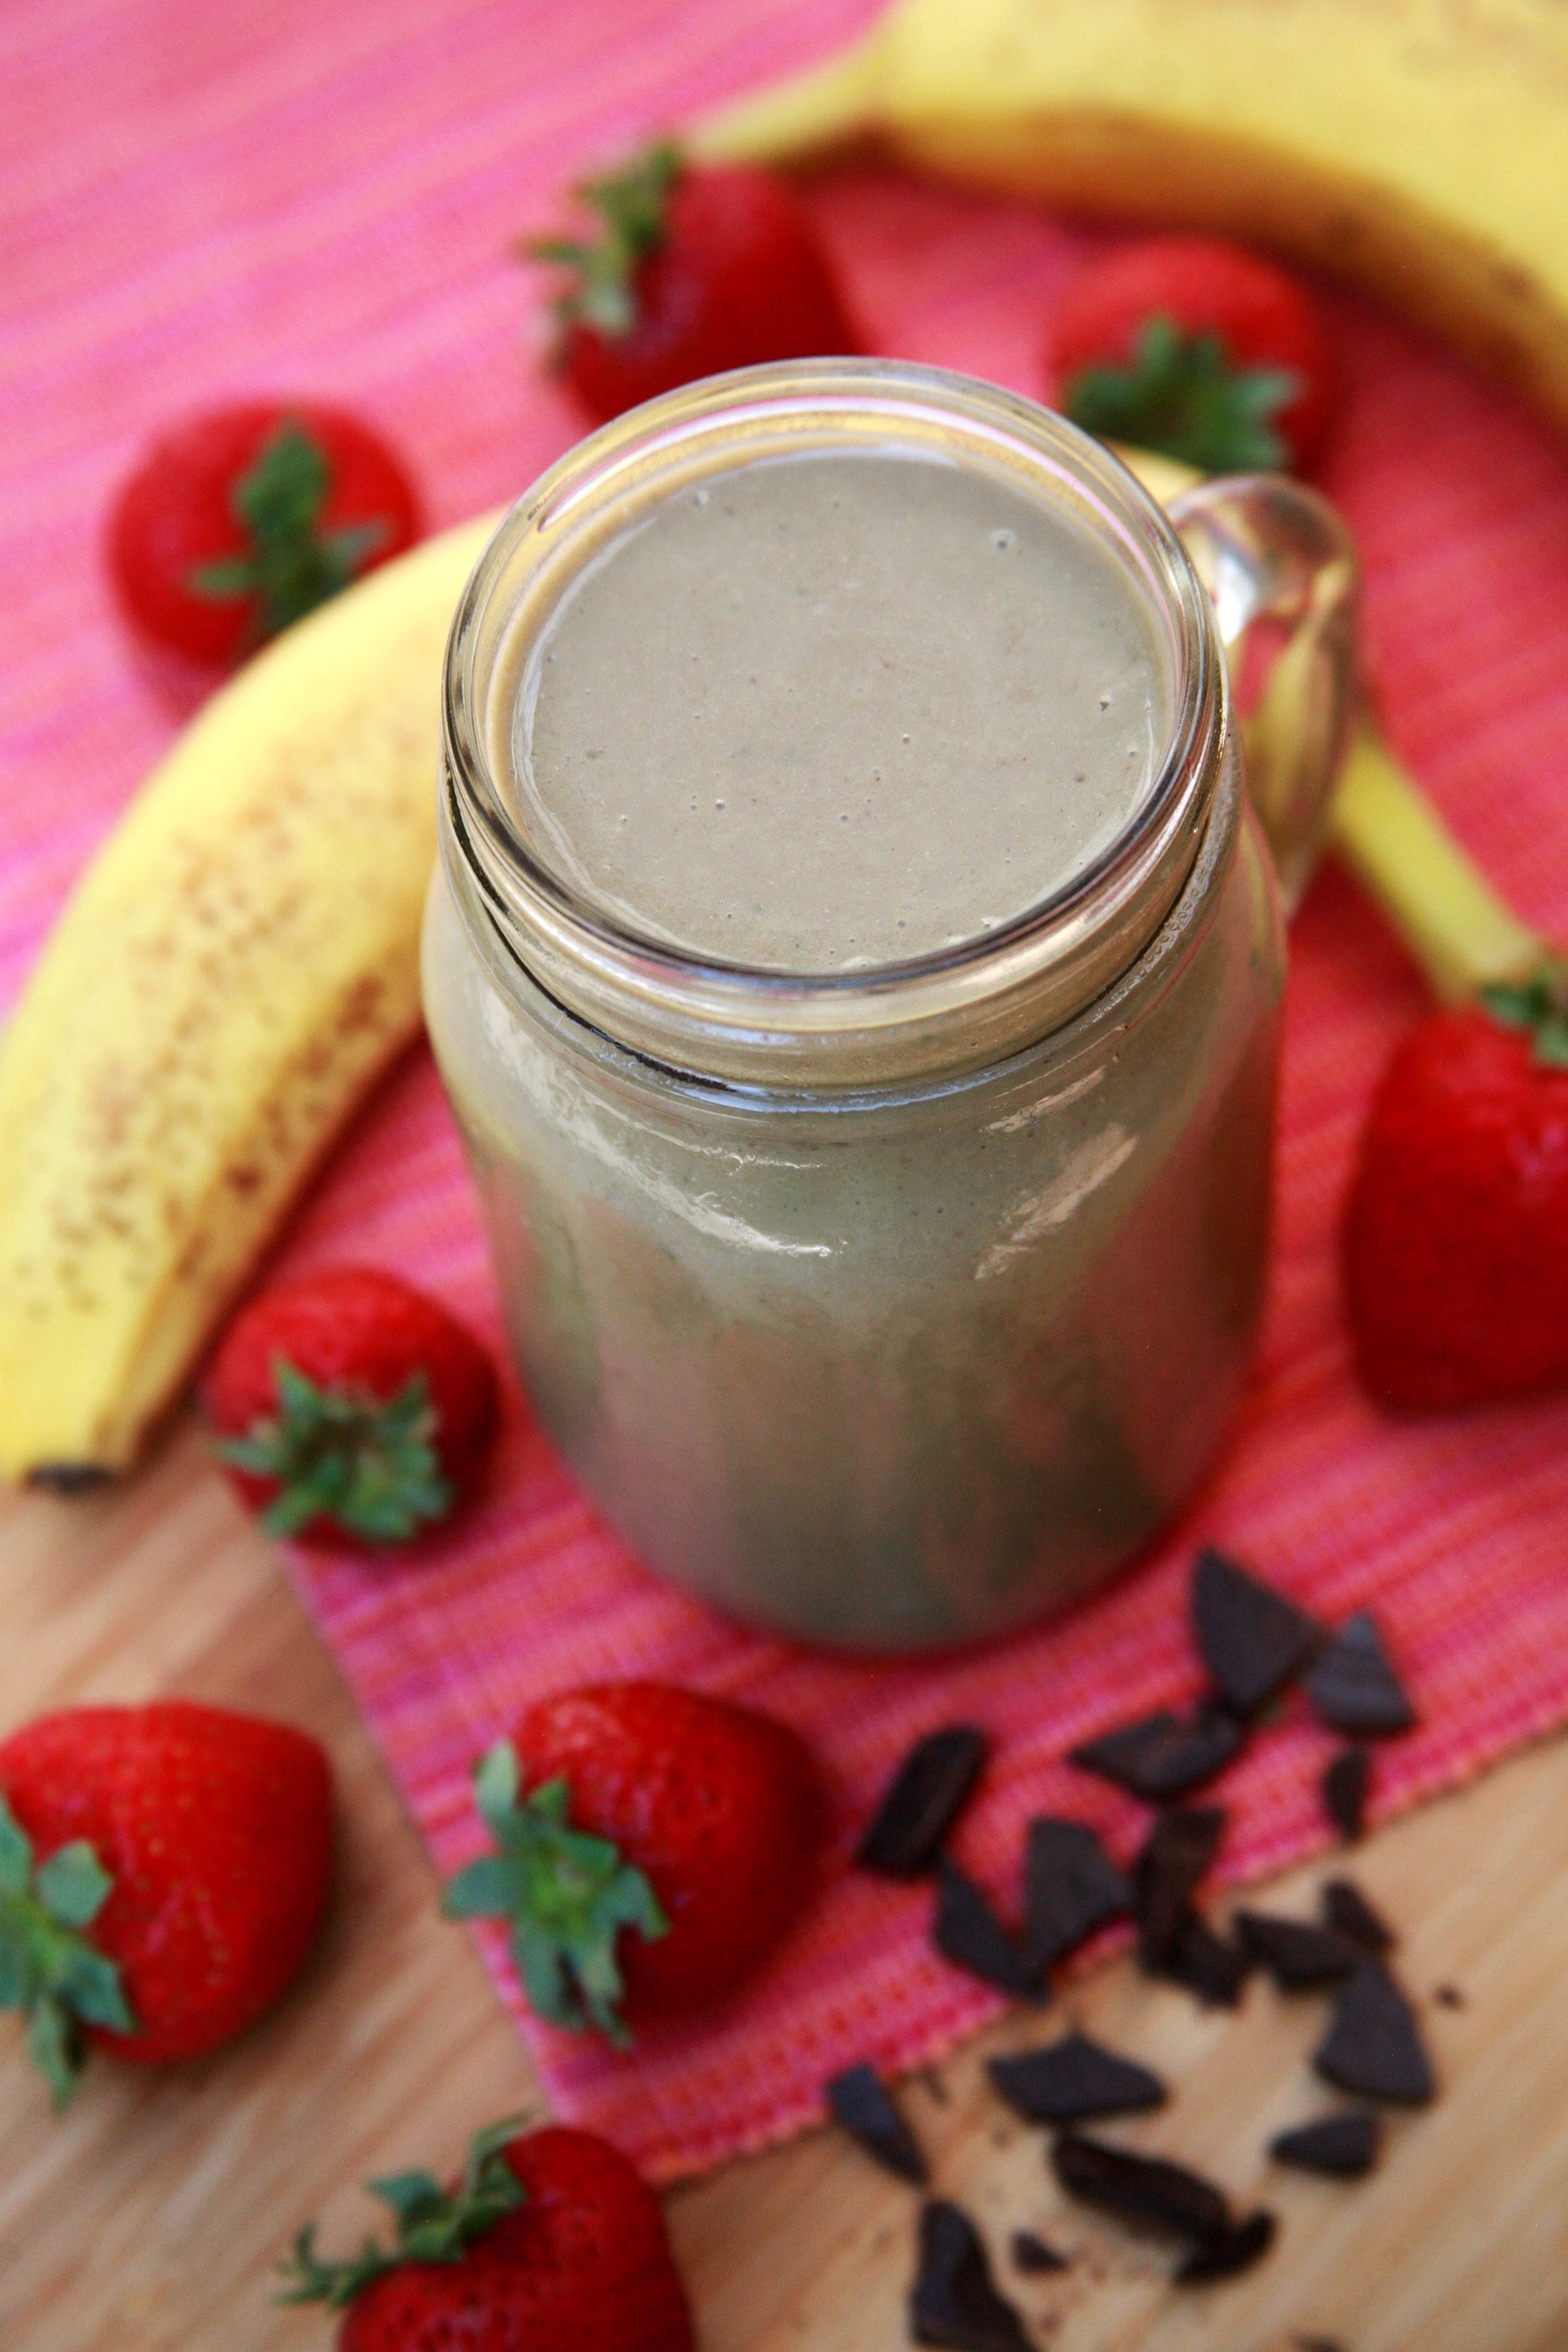 High Fiber Smoothie Recipes for Weight Loss (Dietitian Approved)